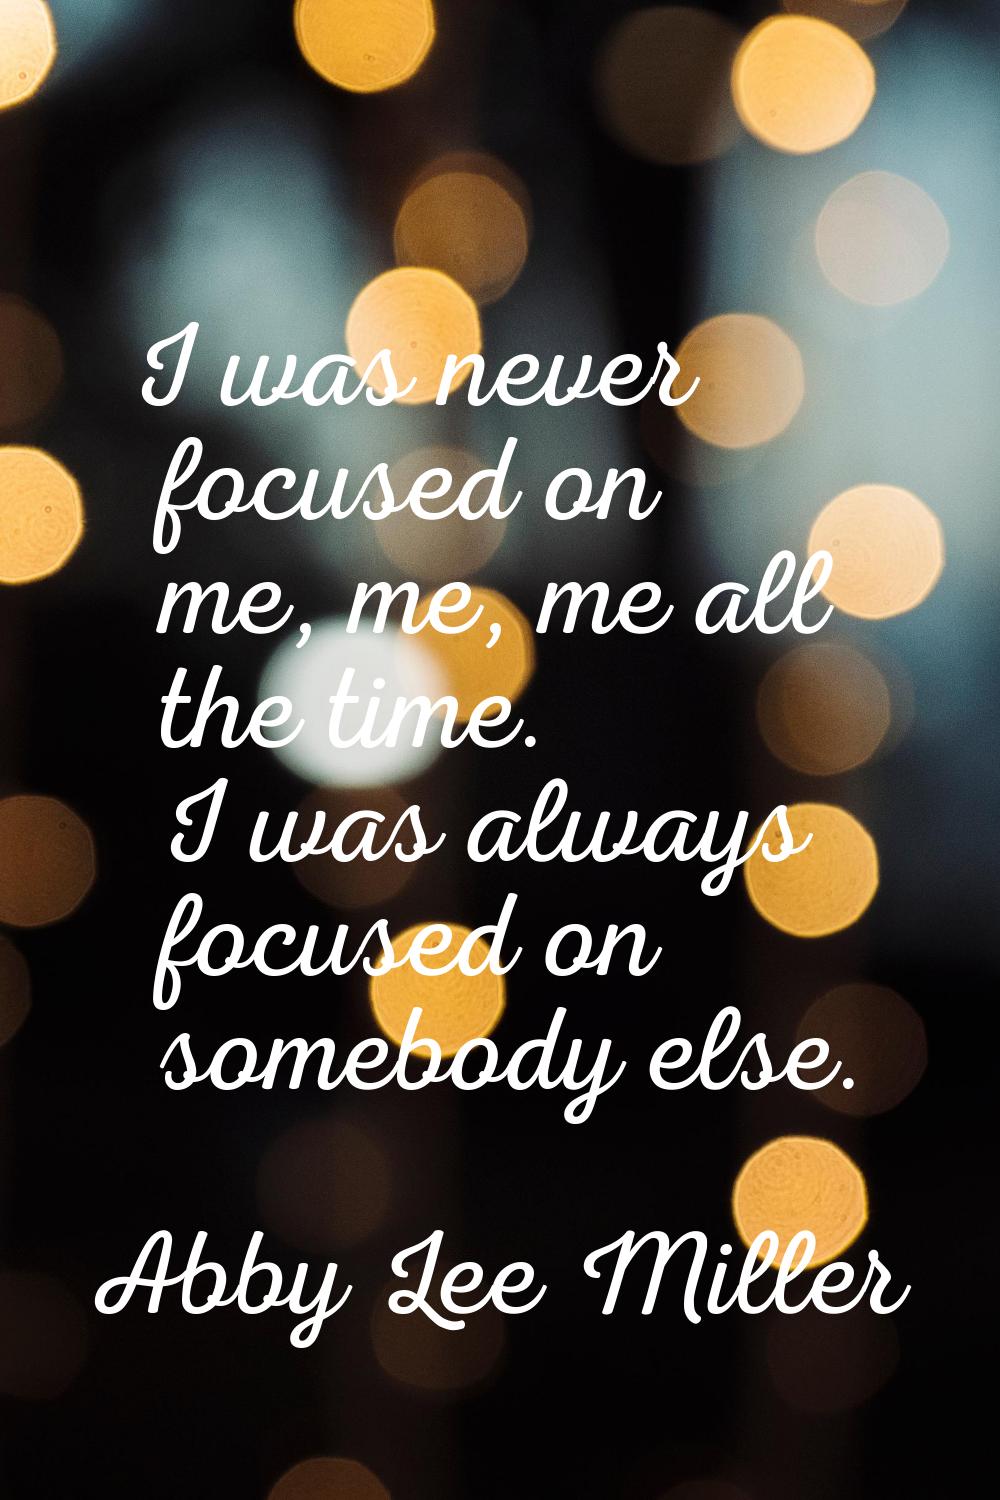 I was never focused on me, me, me all the time. I was always focused on somebody else.